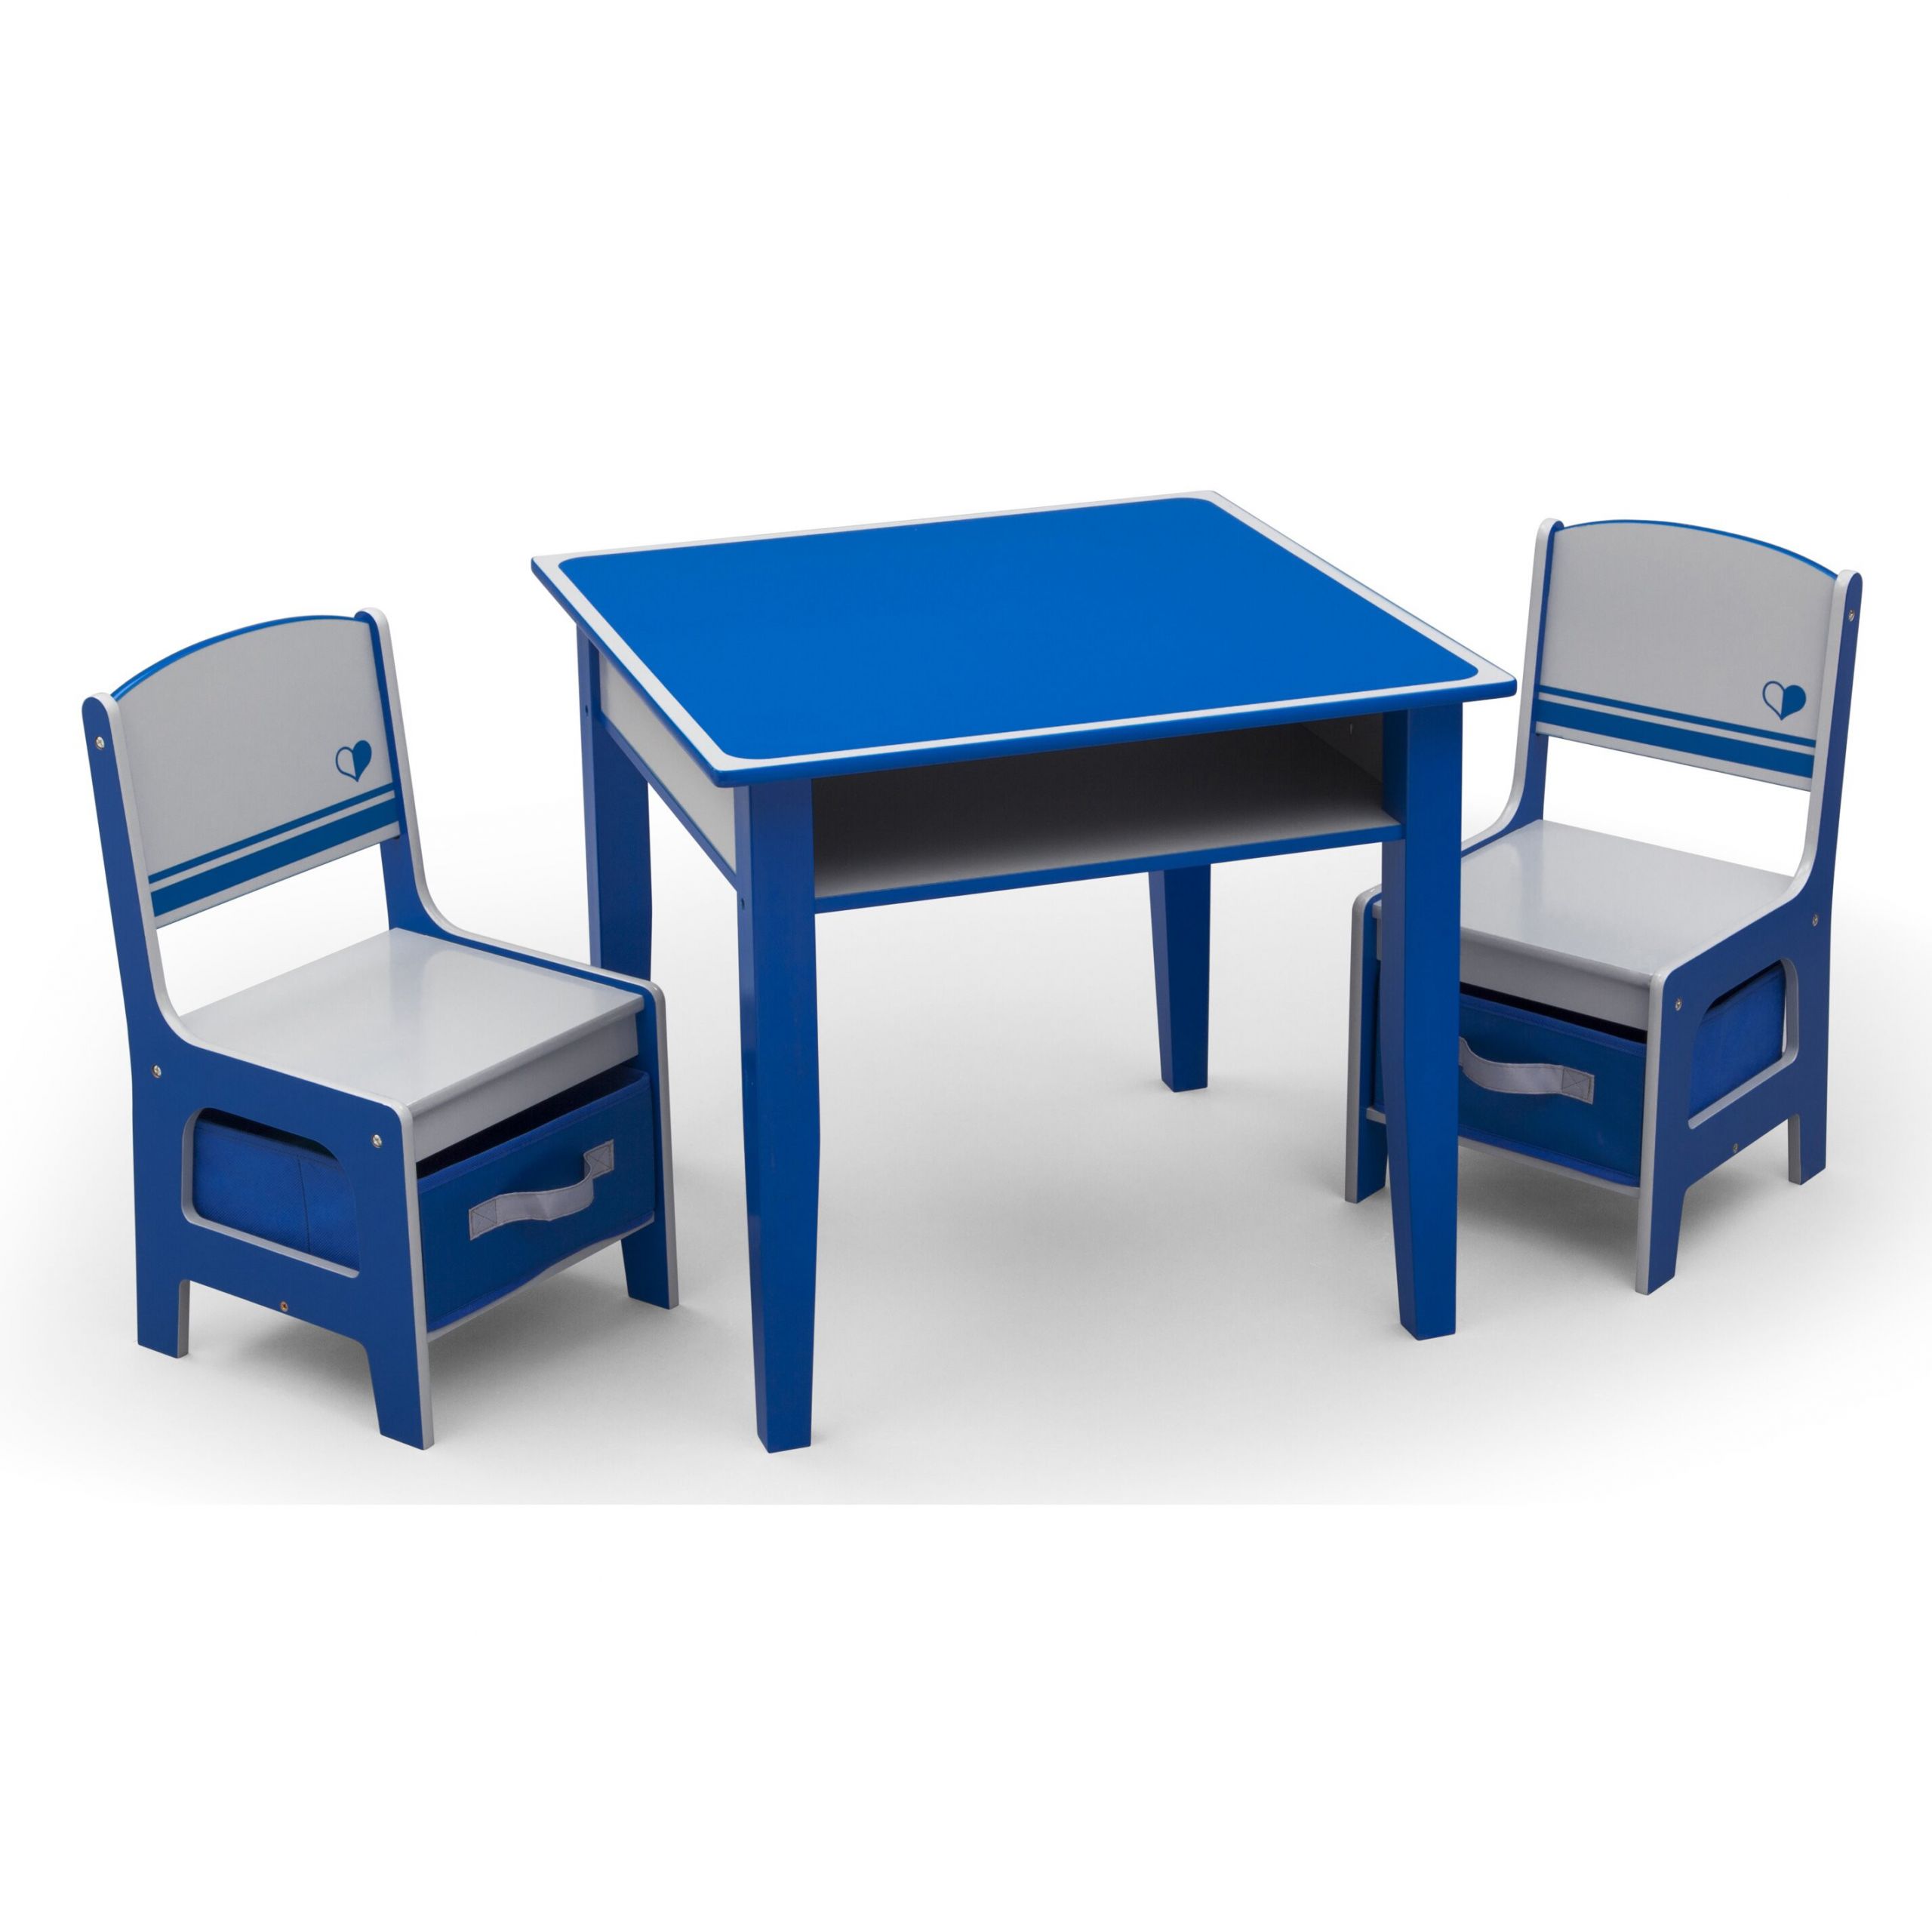 Kids Table And Chair Set
 Delta Children Jack and Jill Kids 3 Piece Table and Chair